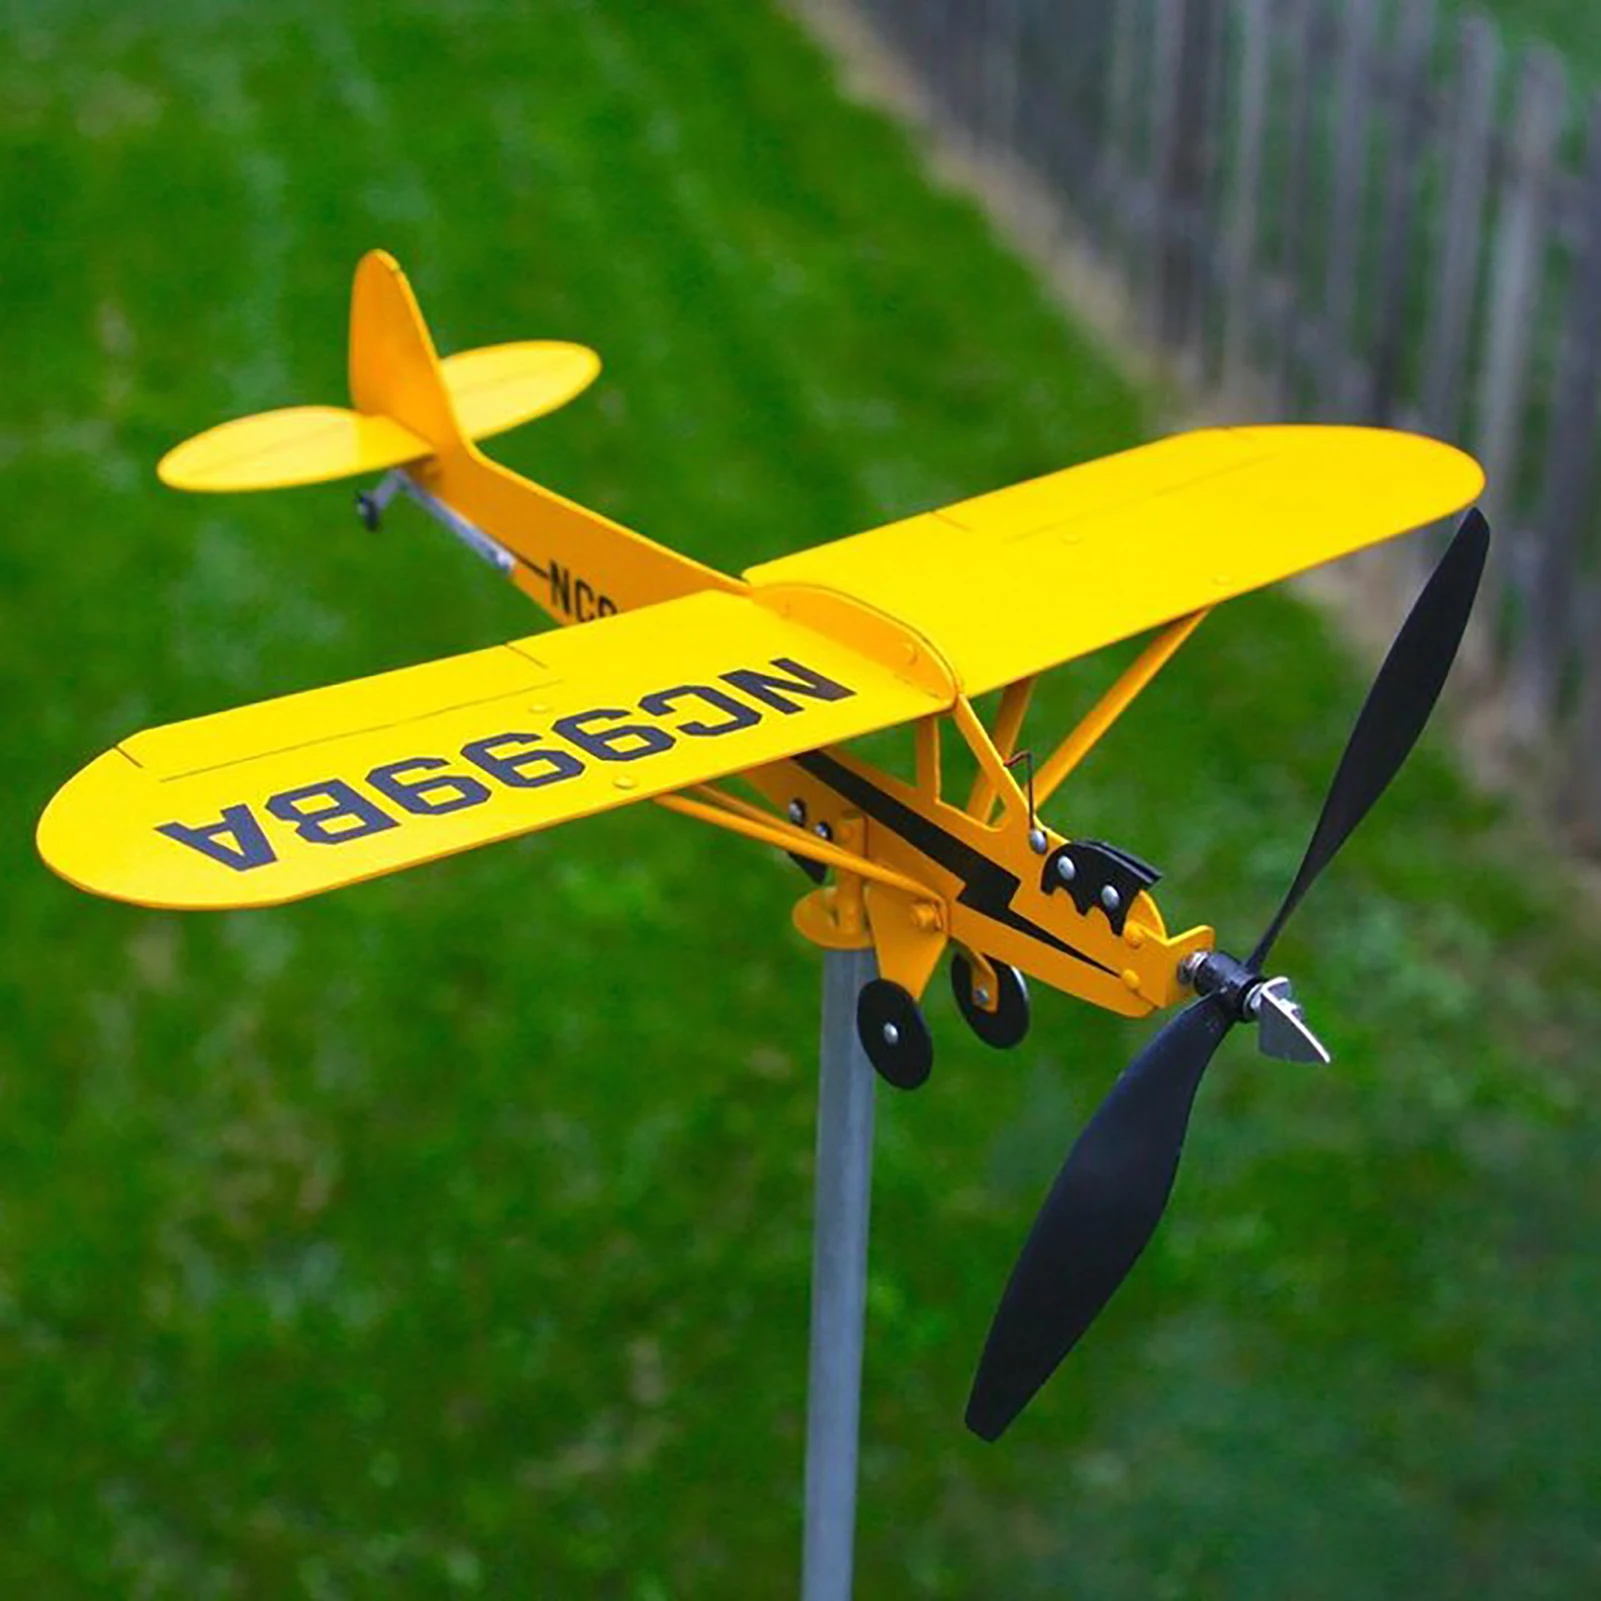 

Garden Decoration Piper J3 Cub Airplane Weathervane Outdoor Garden Aircraft Weather Vane Plug Decor Wind Spinners Roof Plug-in